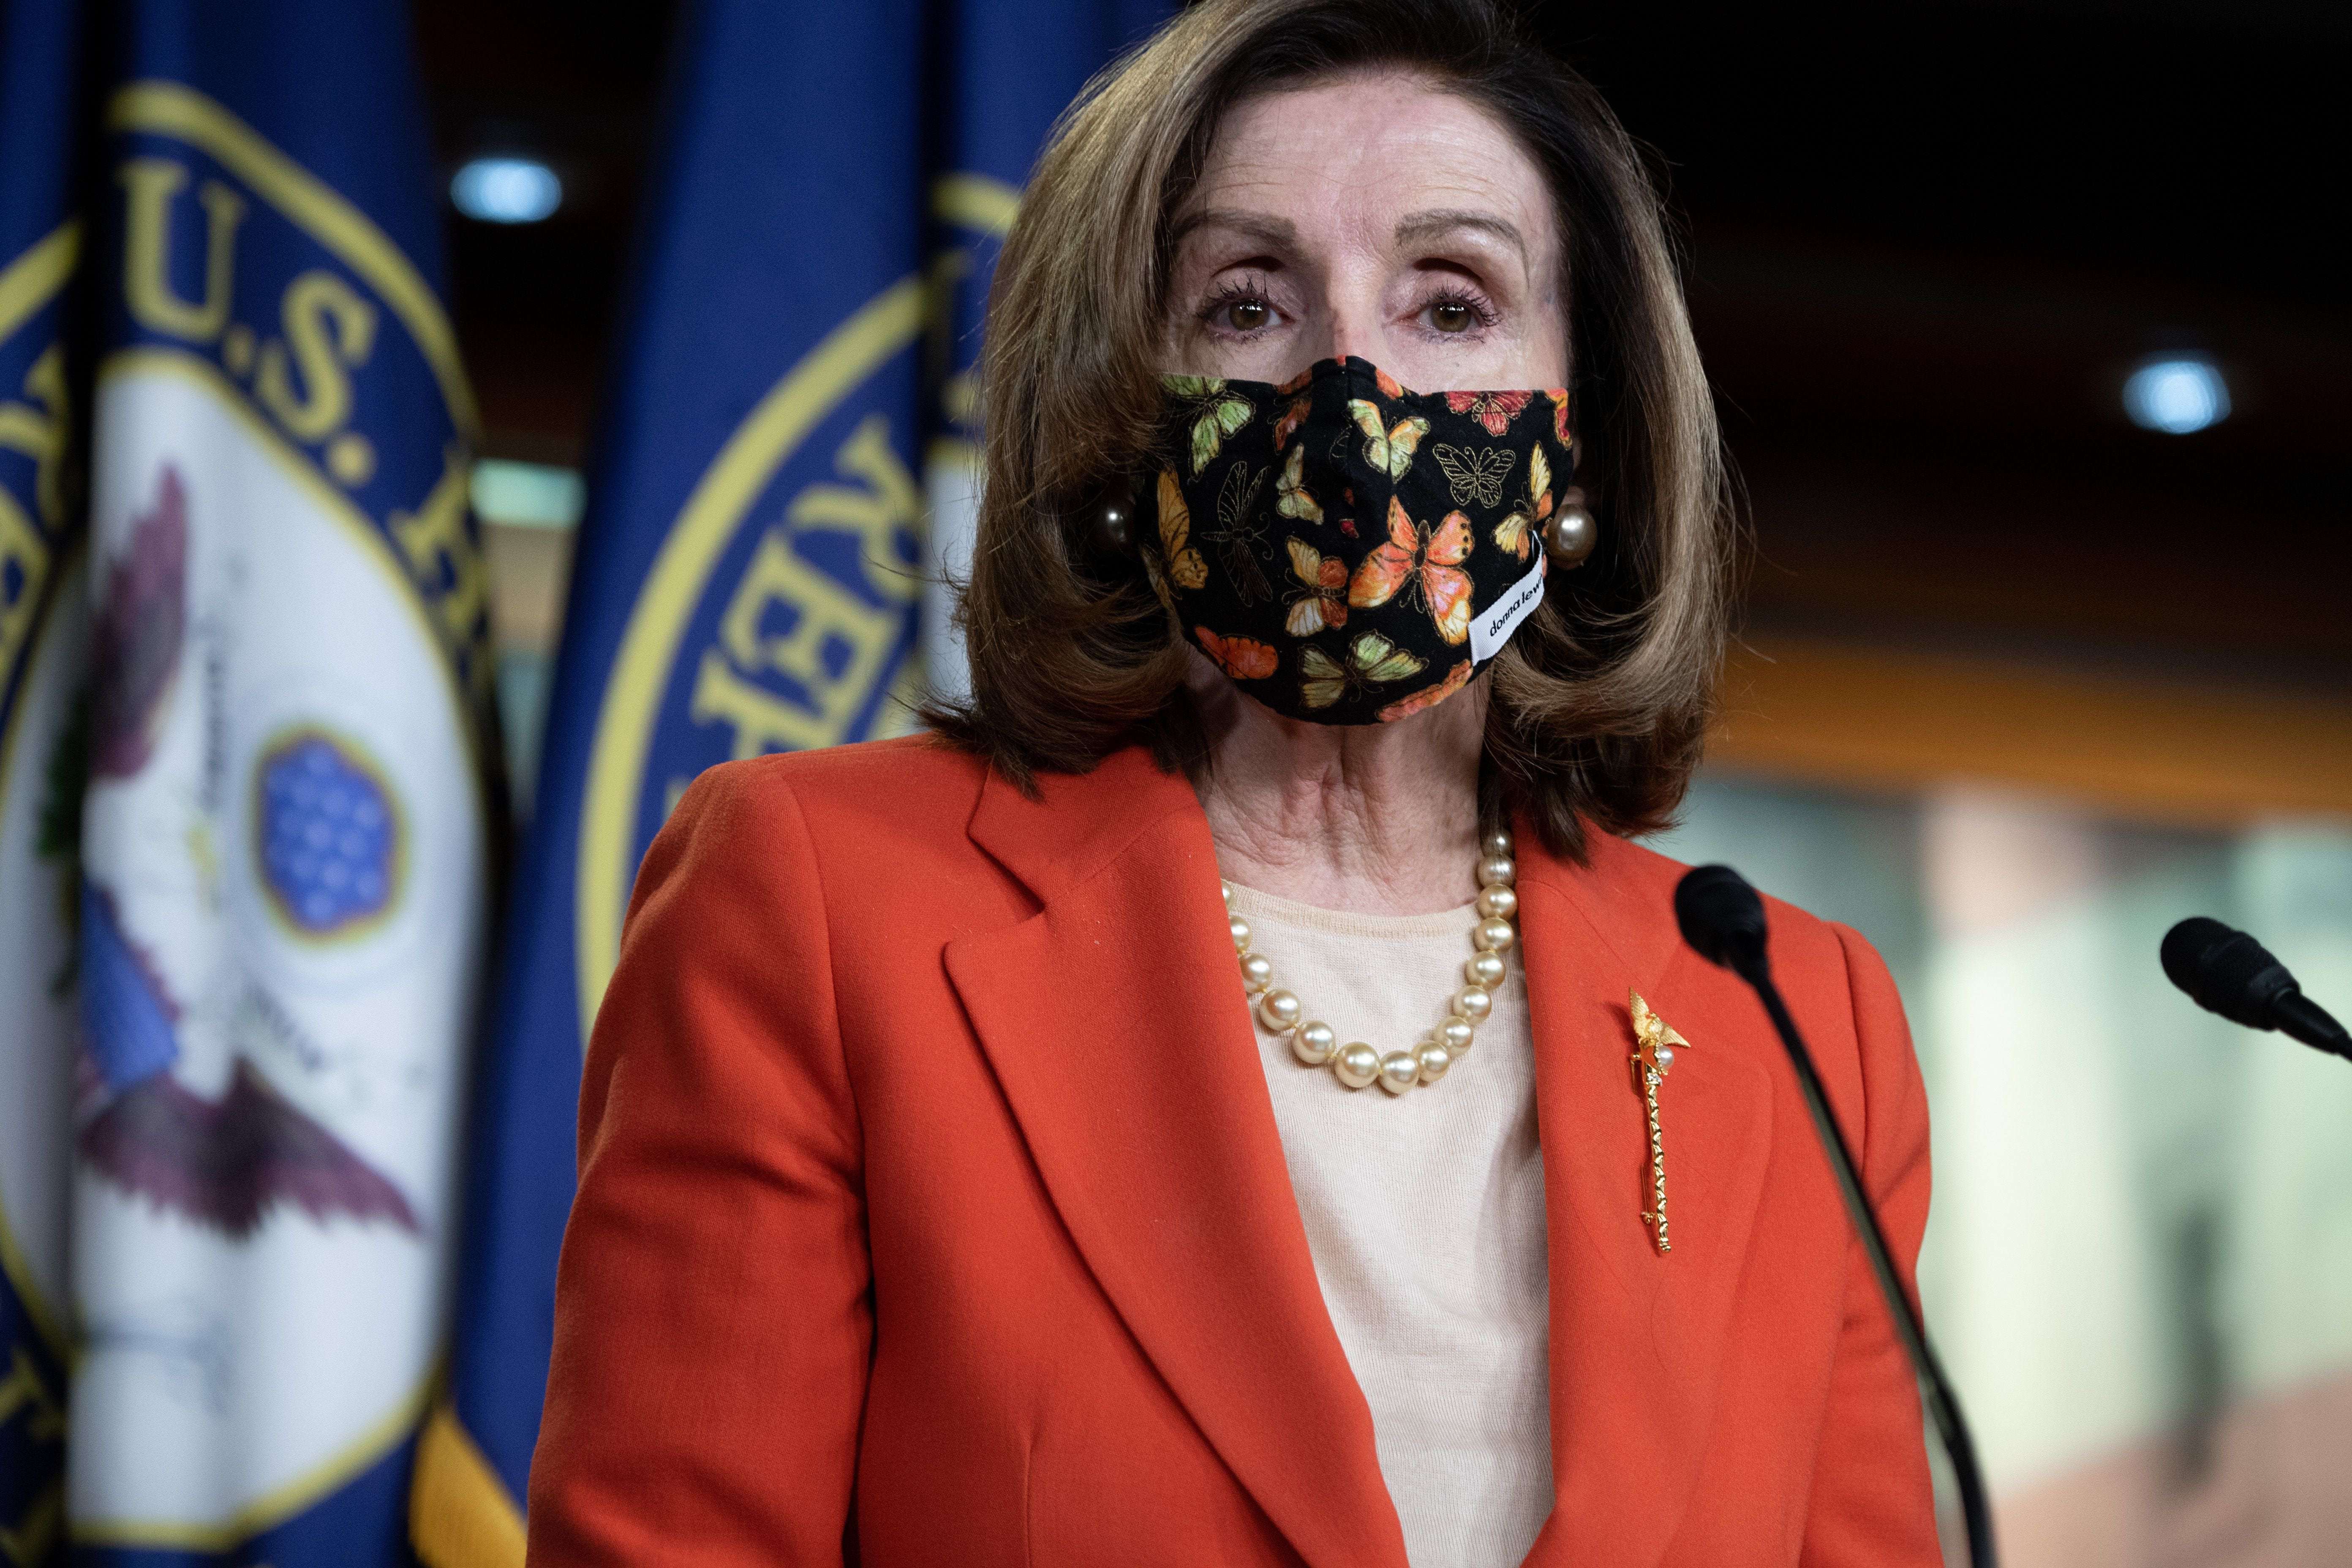 image for Tearful Pelosi says Congress members may be prosecuted as she announces Capitol security review